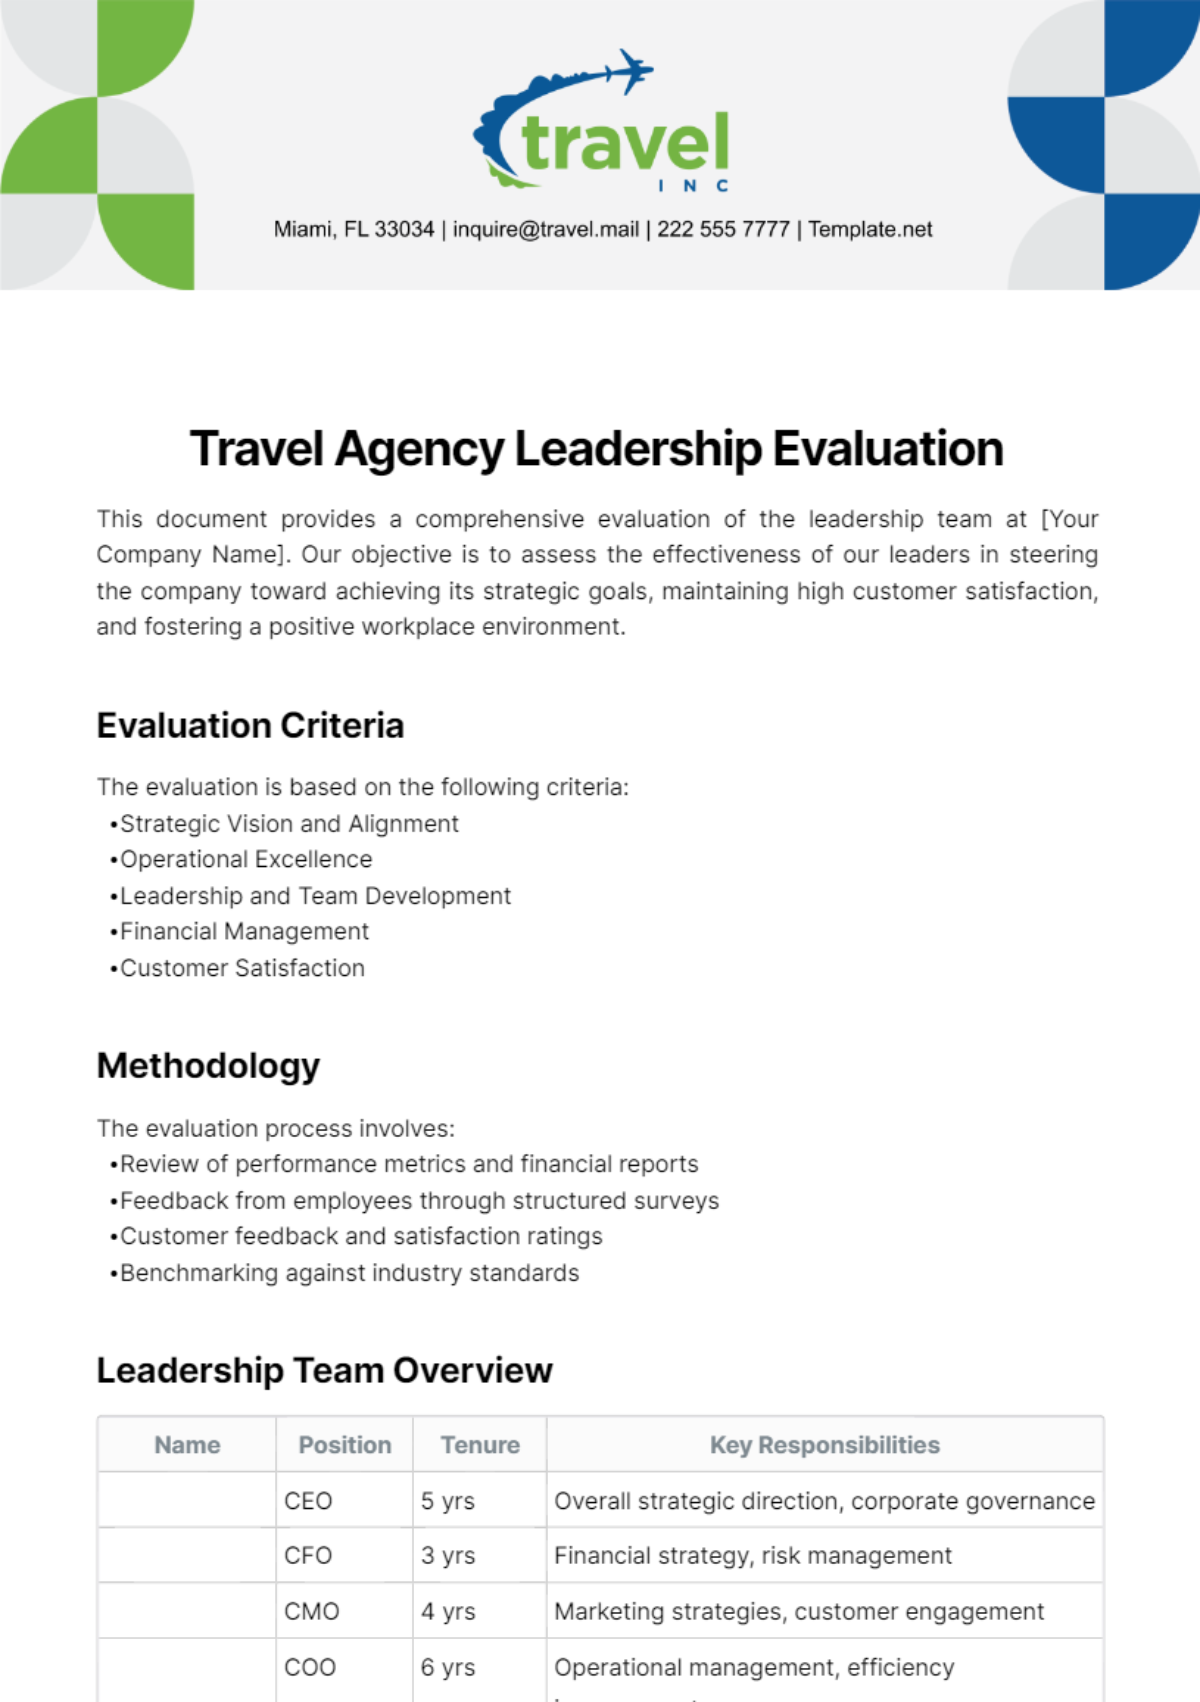 Travel Agency Leadership Evaluation Template